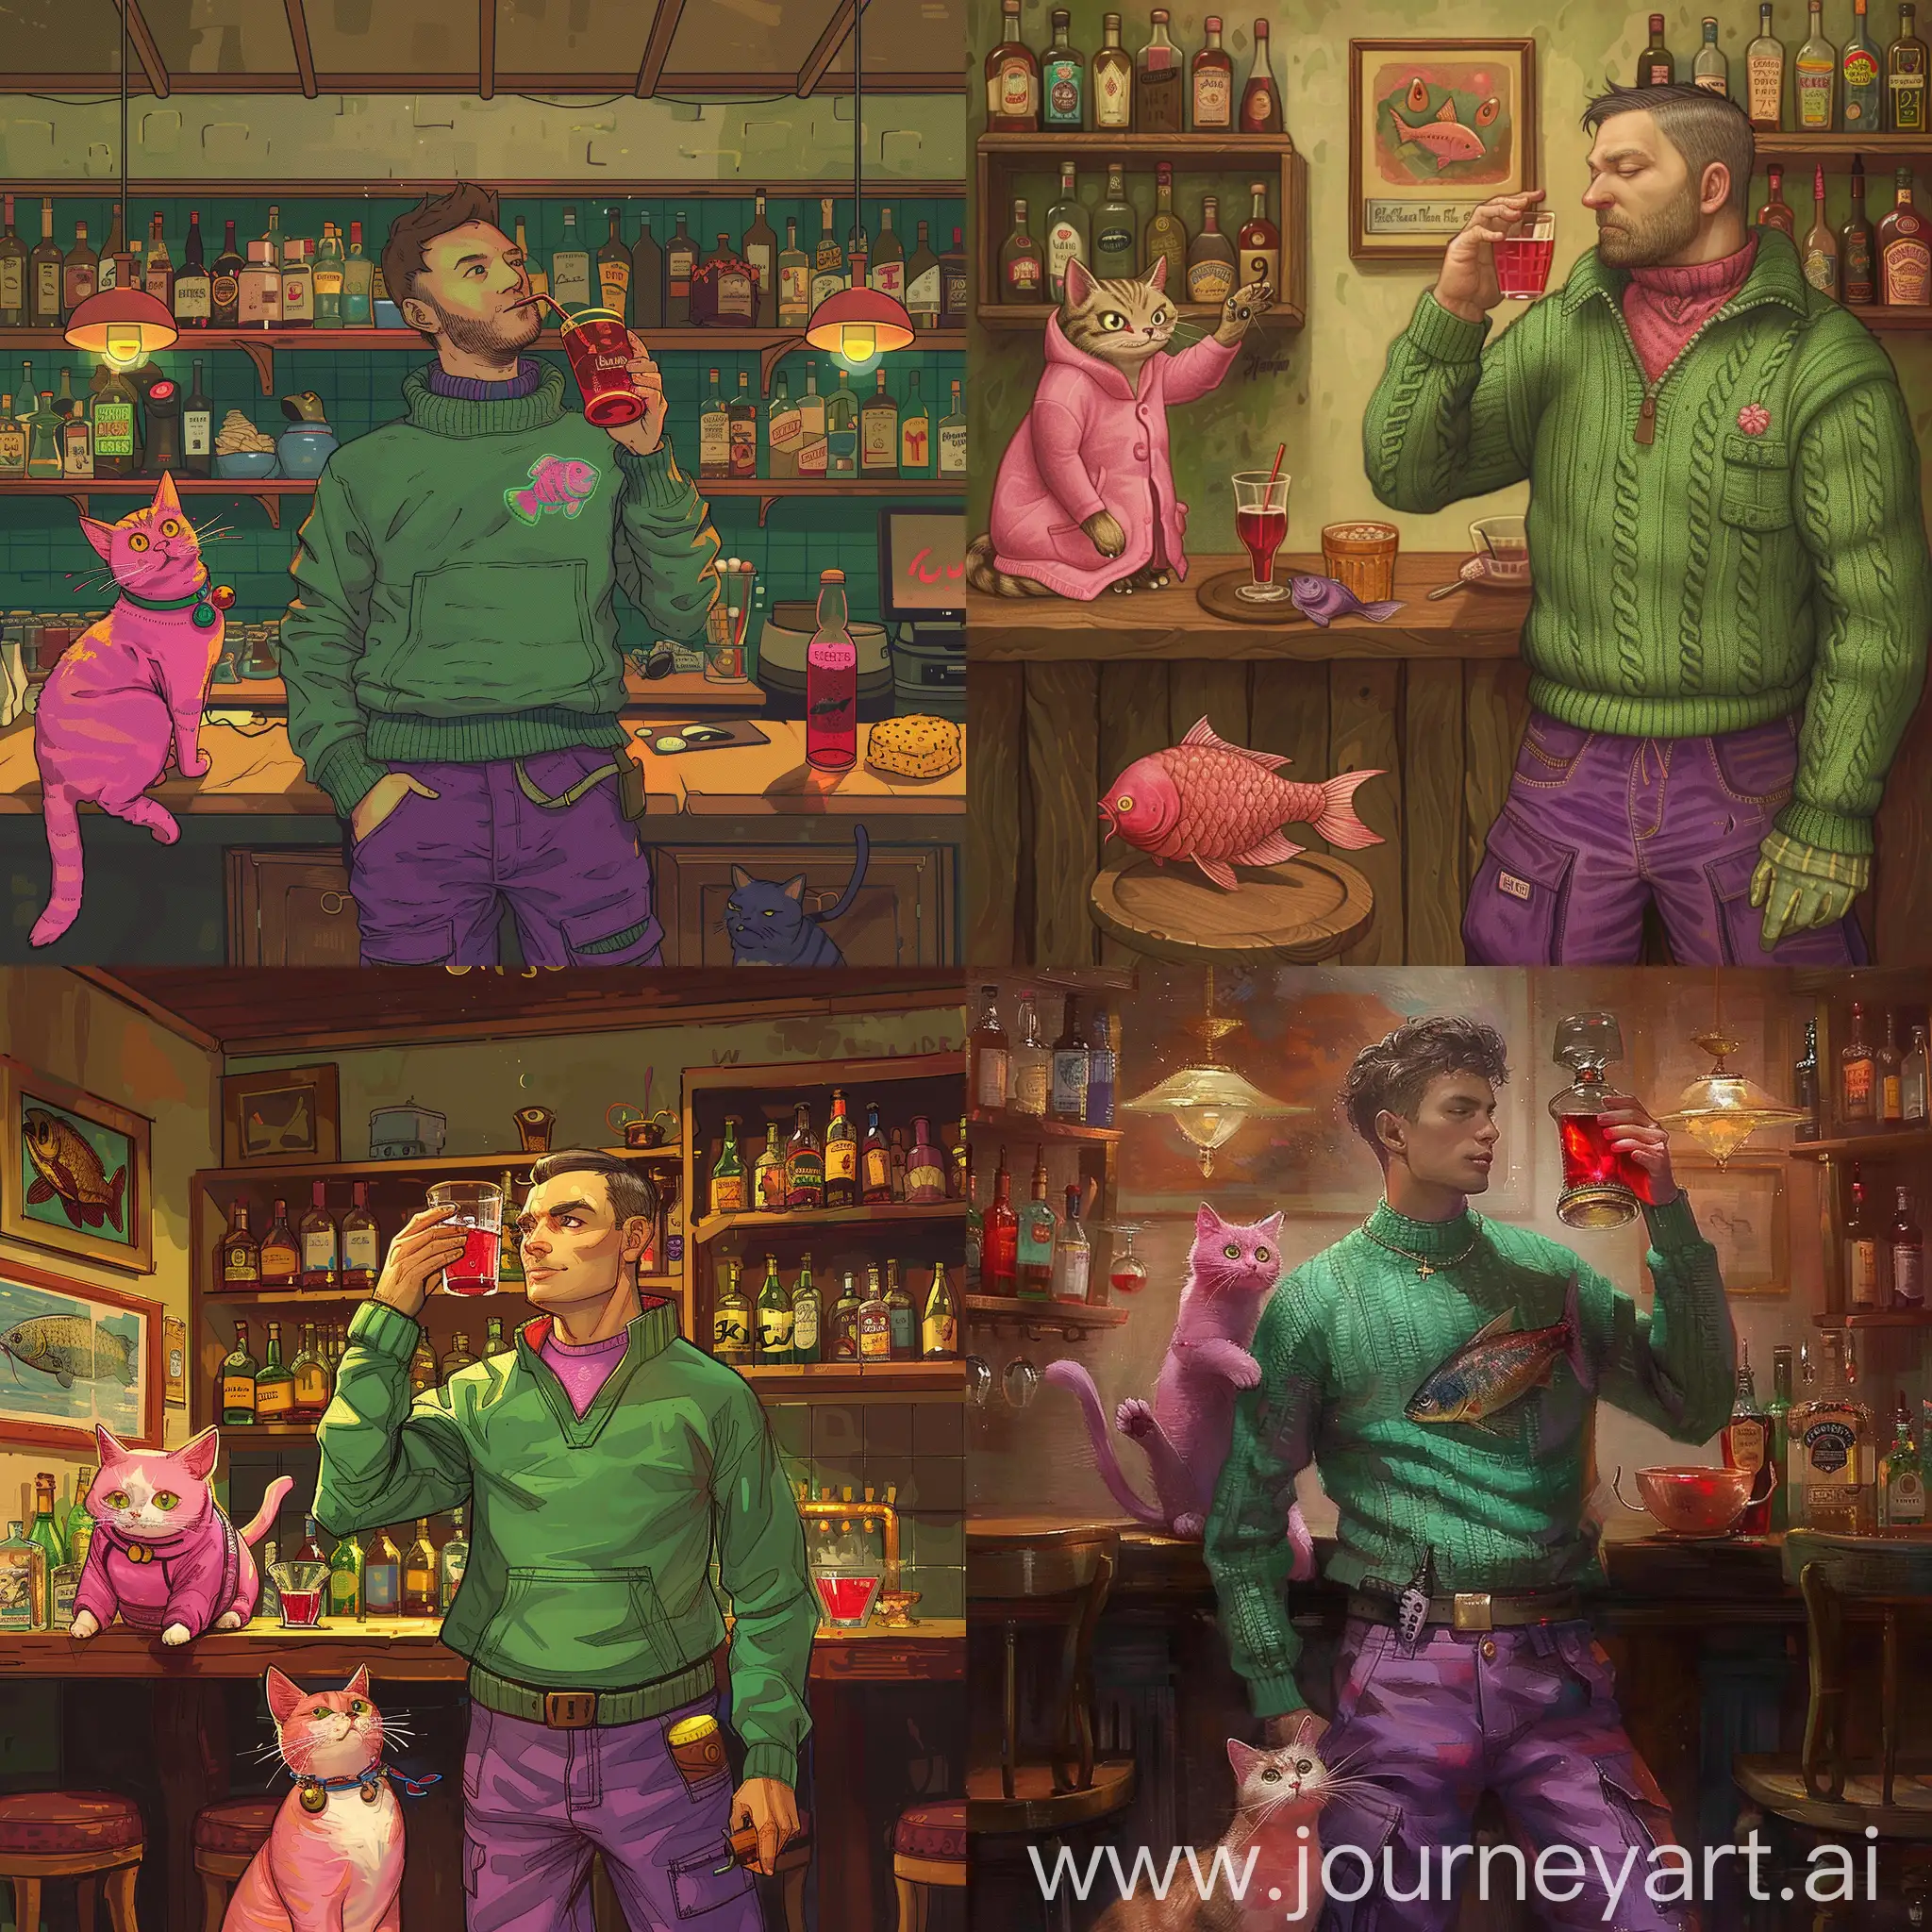 Man-Enjoying-Drinks-with-Pink-Cat-Companion-in-Green-Sweater-at-Red-Alcoholic-Bar